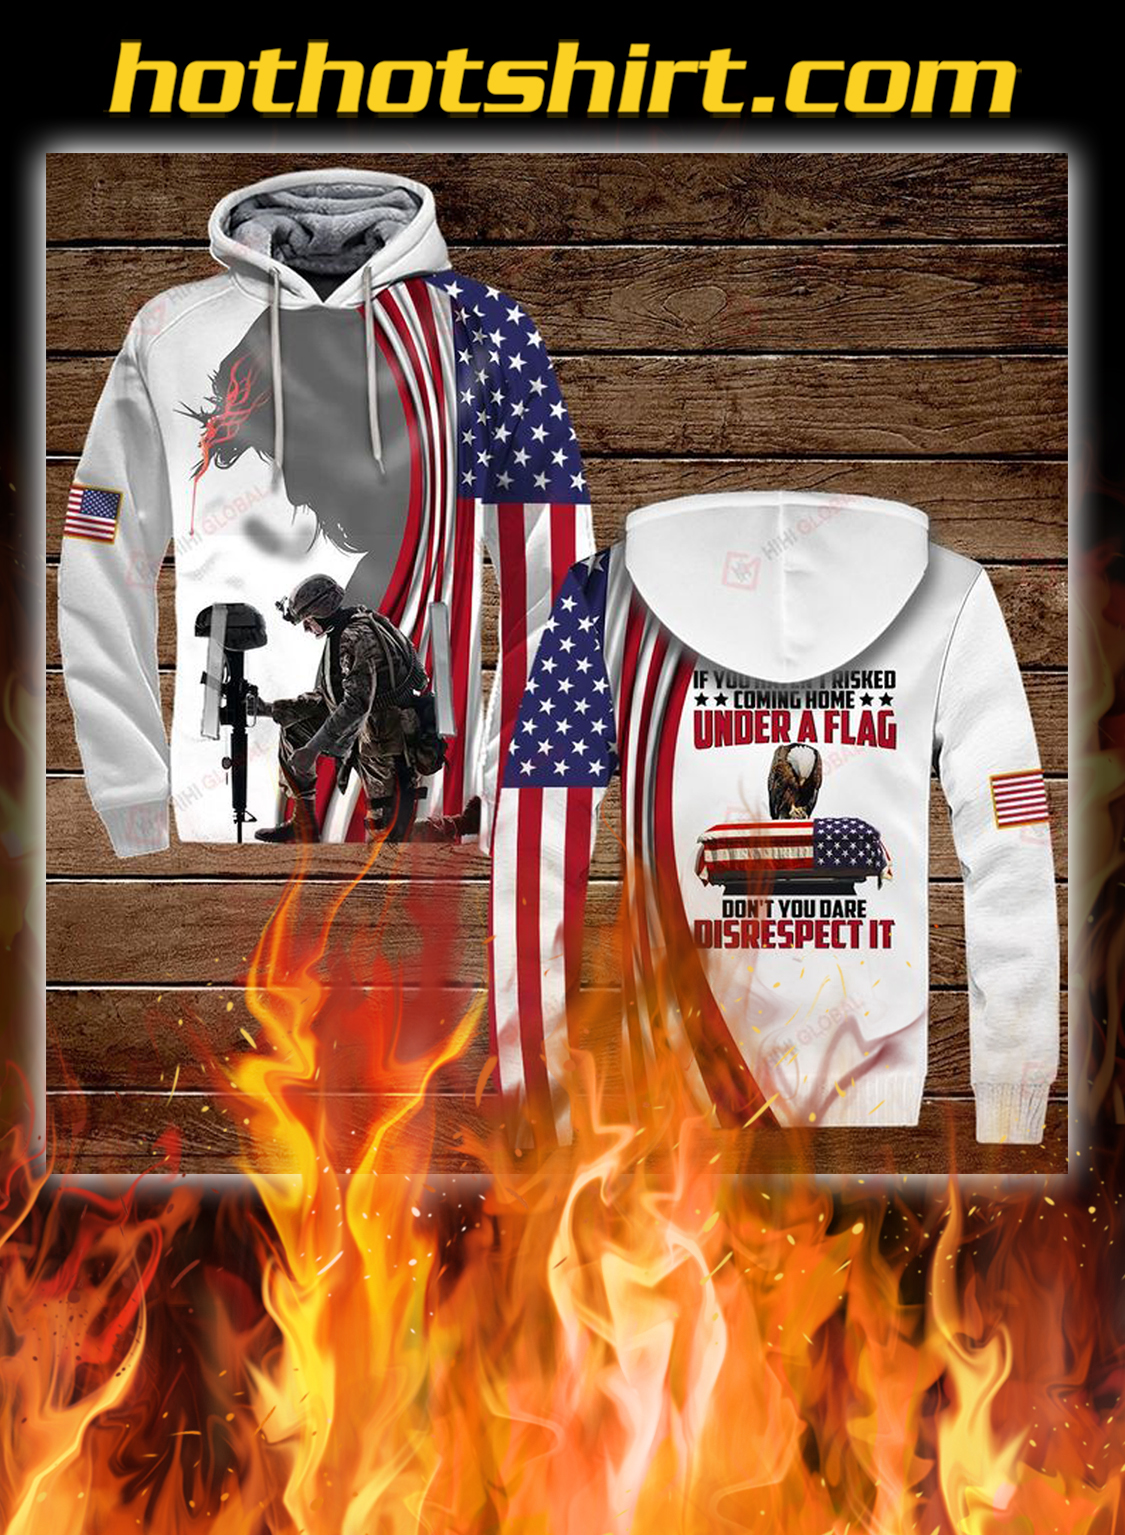 If you haven’t risked coming home under a flag don’t you dare disrespect 3d all over printed hoodie, shirt